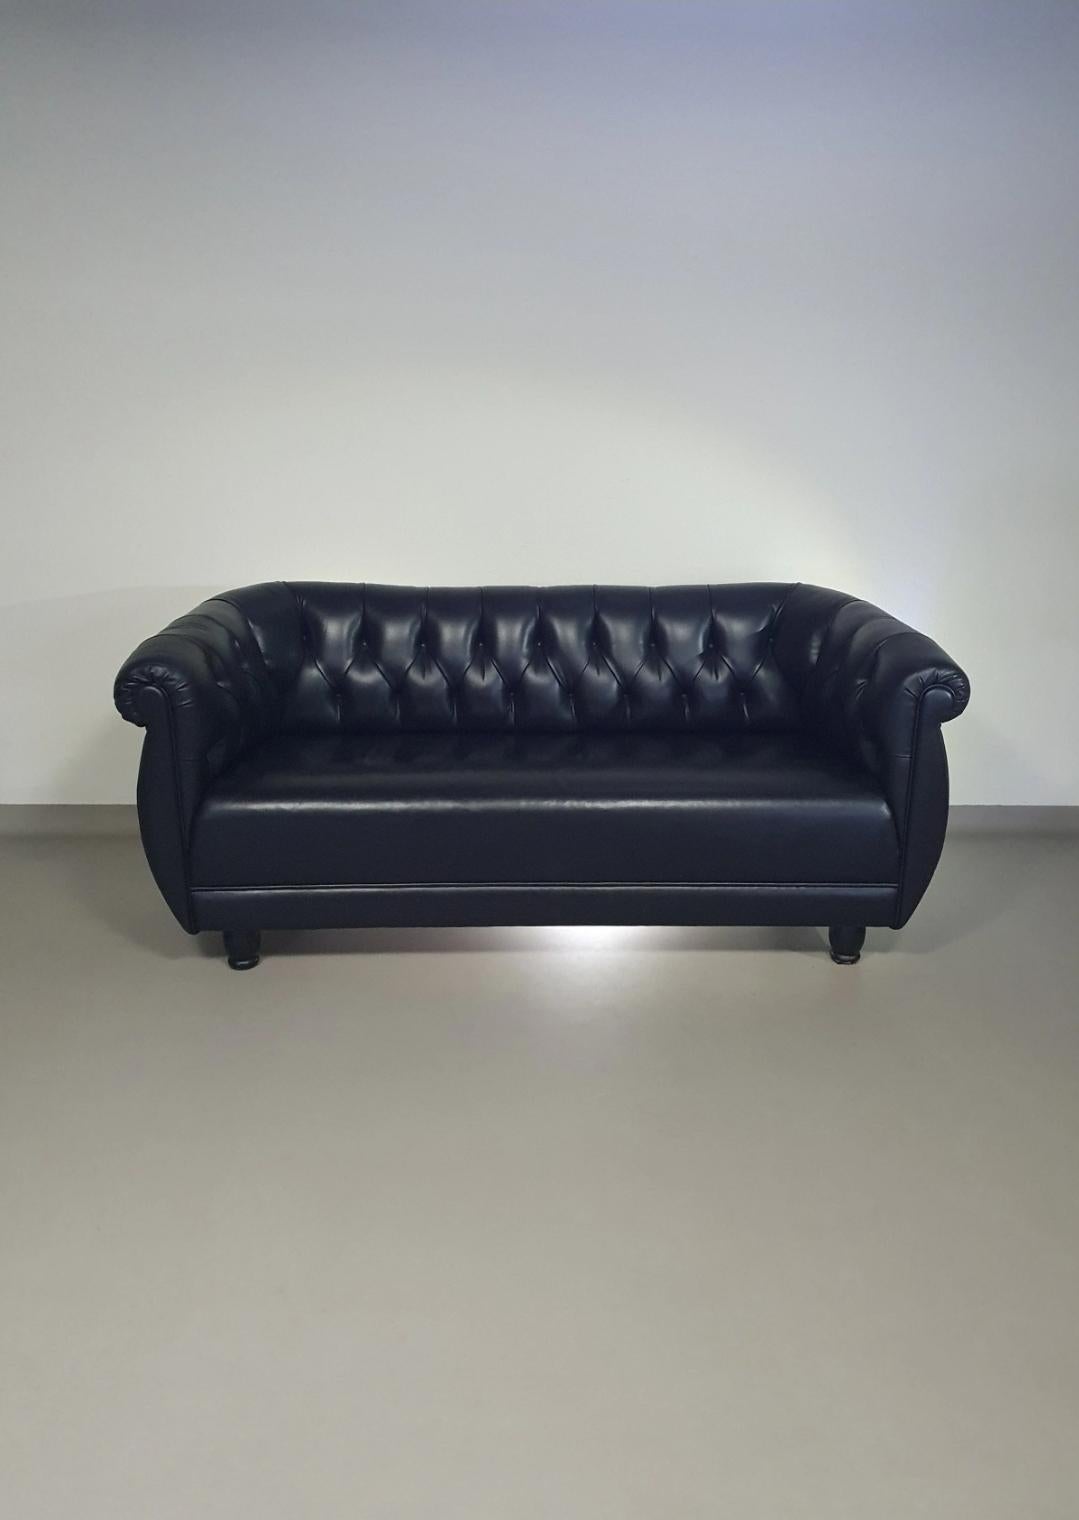 Leather Black leather sofa by Anna Gili for Mastrangelo  Milan Furniture 1996 For Sale